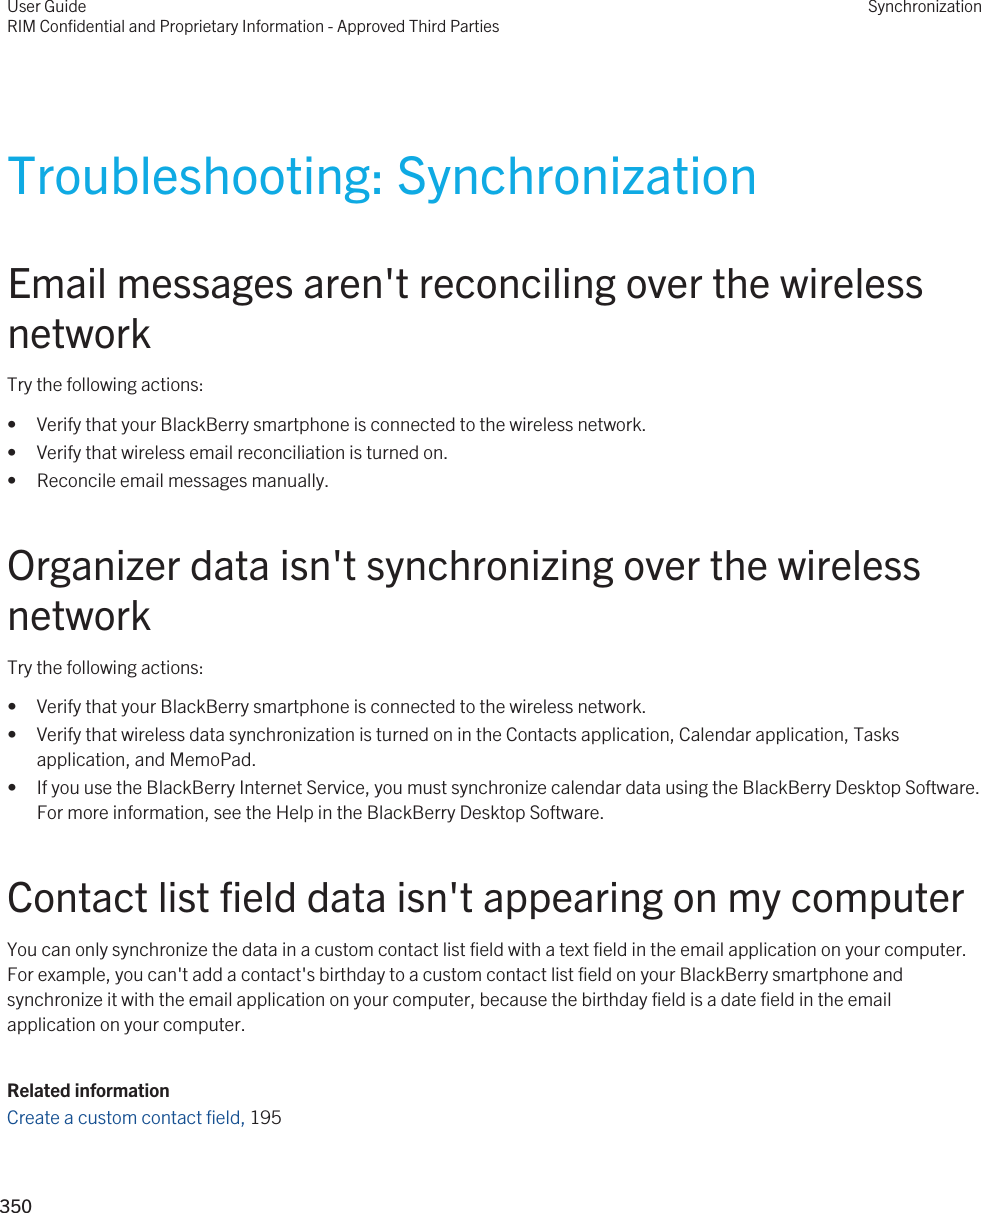 Troubleshooting: SynchronizationEmail messages aren&apos;t reconciling over the wireless networkTry the following actions:• Verify that your BlackBerry smartphone is connected to the wireless network.• Verify that wireless email reconciliation is turned on.• Reconcile email messages manually.Organizer data isn&apos;t synchronizing over the wireless networkTry the following actions:• Verify that your BlackBerry smartphone is connected to the wireless network.• Verify that wireless data synchronization is turned on in the Contacts application, Calendar application, Tasks application, and MemoPad.• If you use the BlackBerry Internet Service, you must synchronize calendar data using the BlackBerry Desktop Software. For more information, see the Help in the BlackBerry Desktop Software.Contact list field data isn&apos;t appearing on my computerYou can only synchronize the data in a custom contact list field with a text field in the email application on your computer. For example, you can&apos;t add a contact&apos;s birthday to a custom contact list field on your BlackBerry smartphone and synchronize it with the email application on your computer, because the birthday field is a date field in the email application on your computer.Related informationCreate a custom contact field, 195 User GuideRIM Confidential and Proprietary Information - Approved Third PartiesSynchronization350 